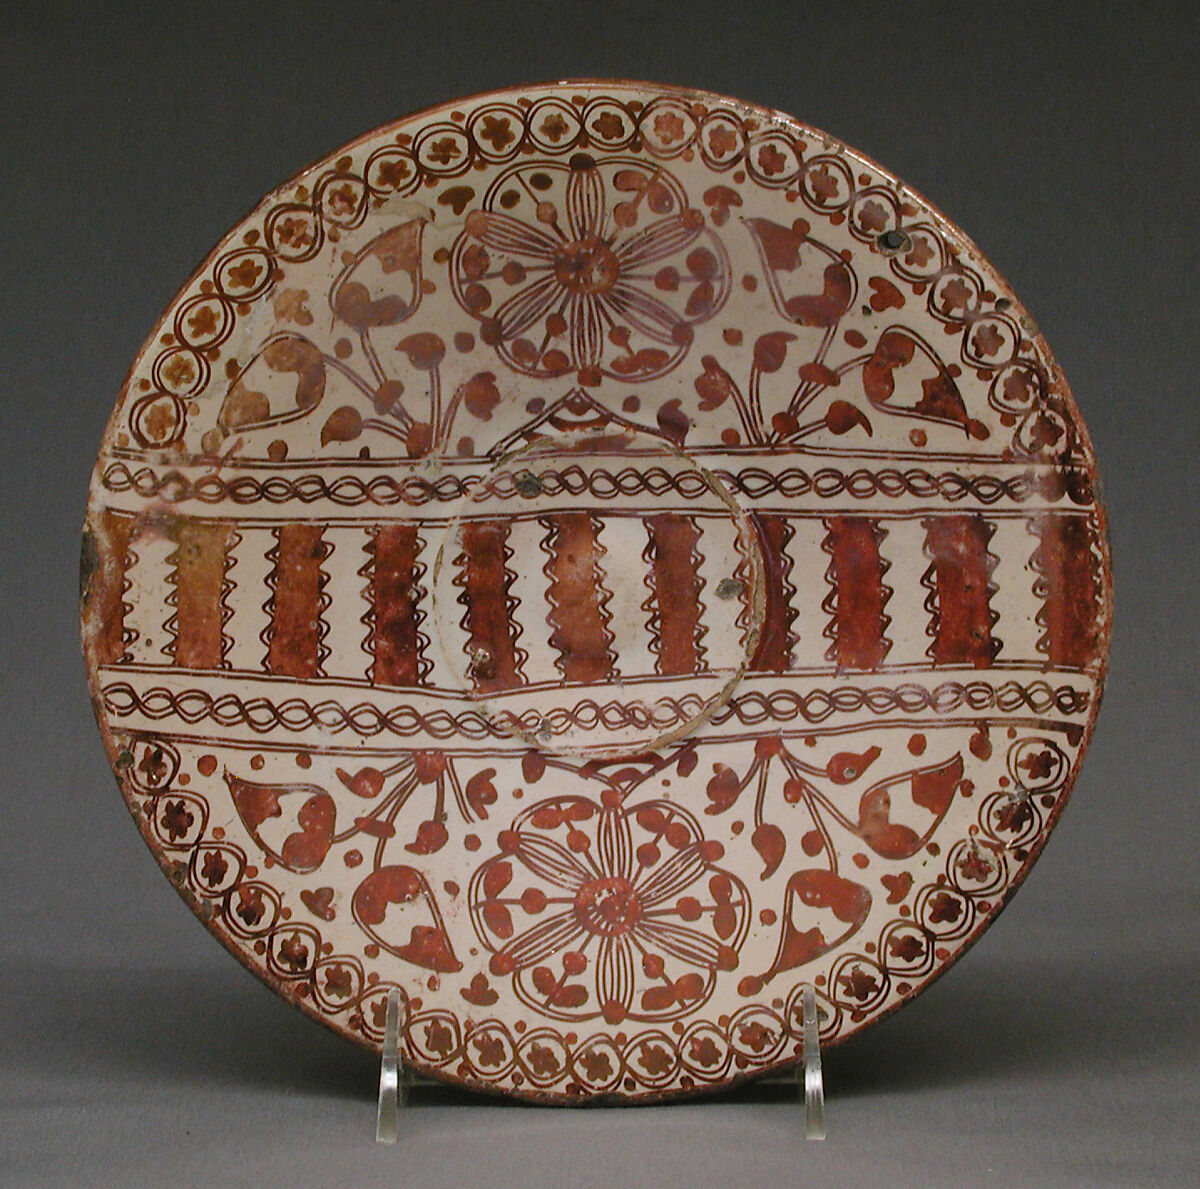 Plate, Tin-glazed and luster-painted earthenware, Spanish, Muel, Aragon 